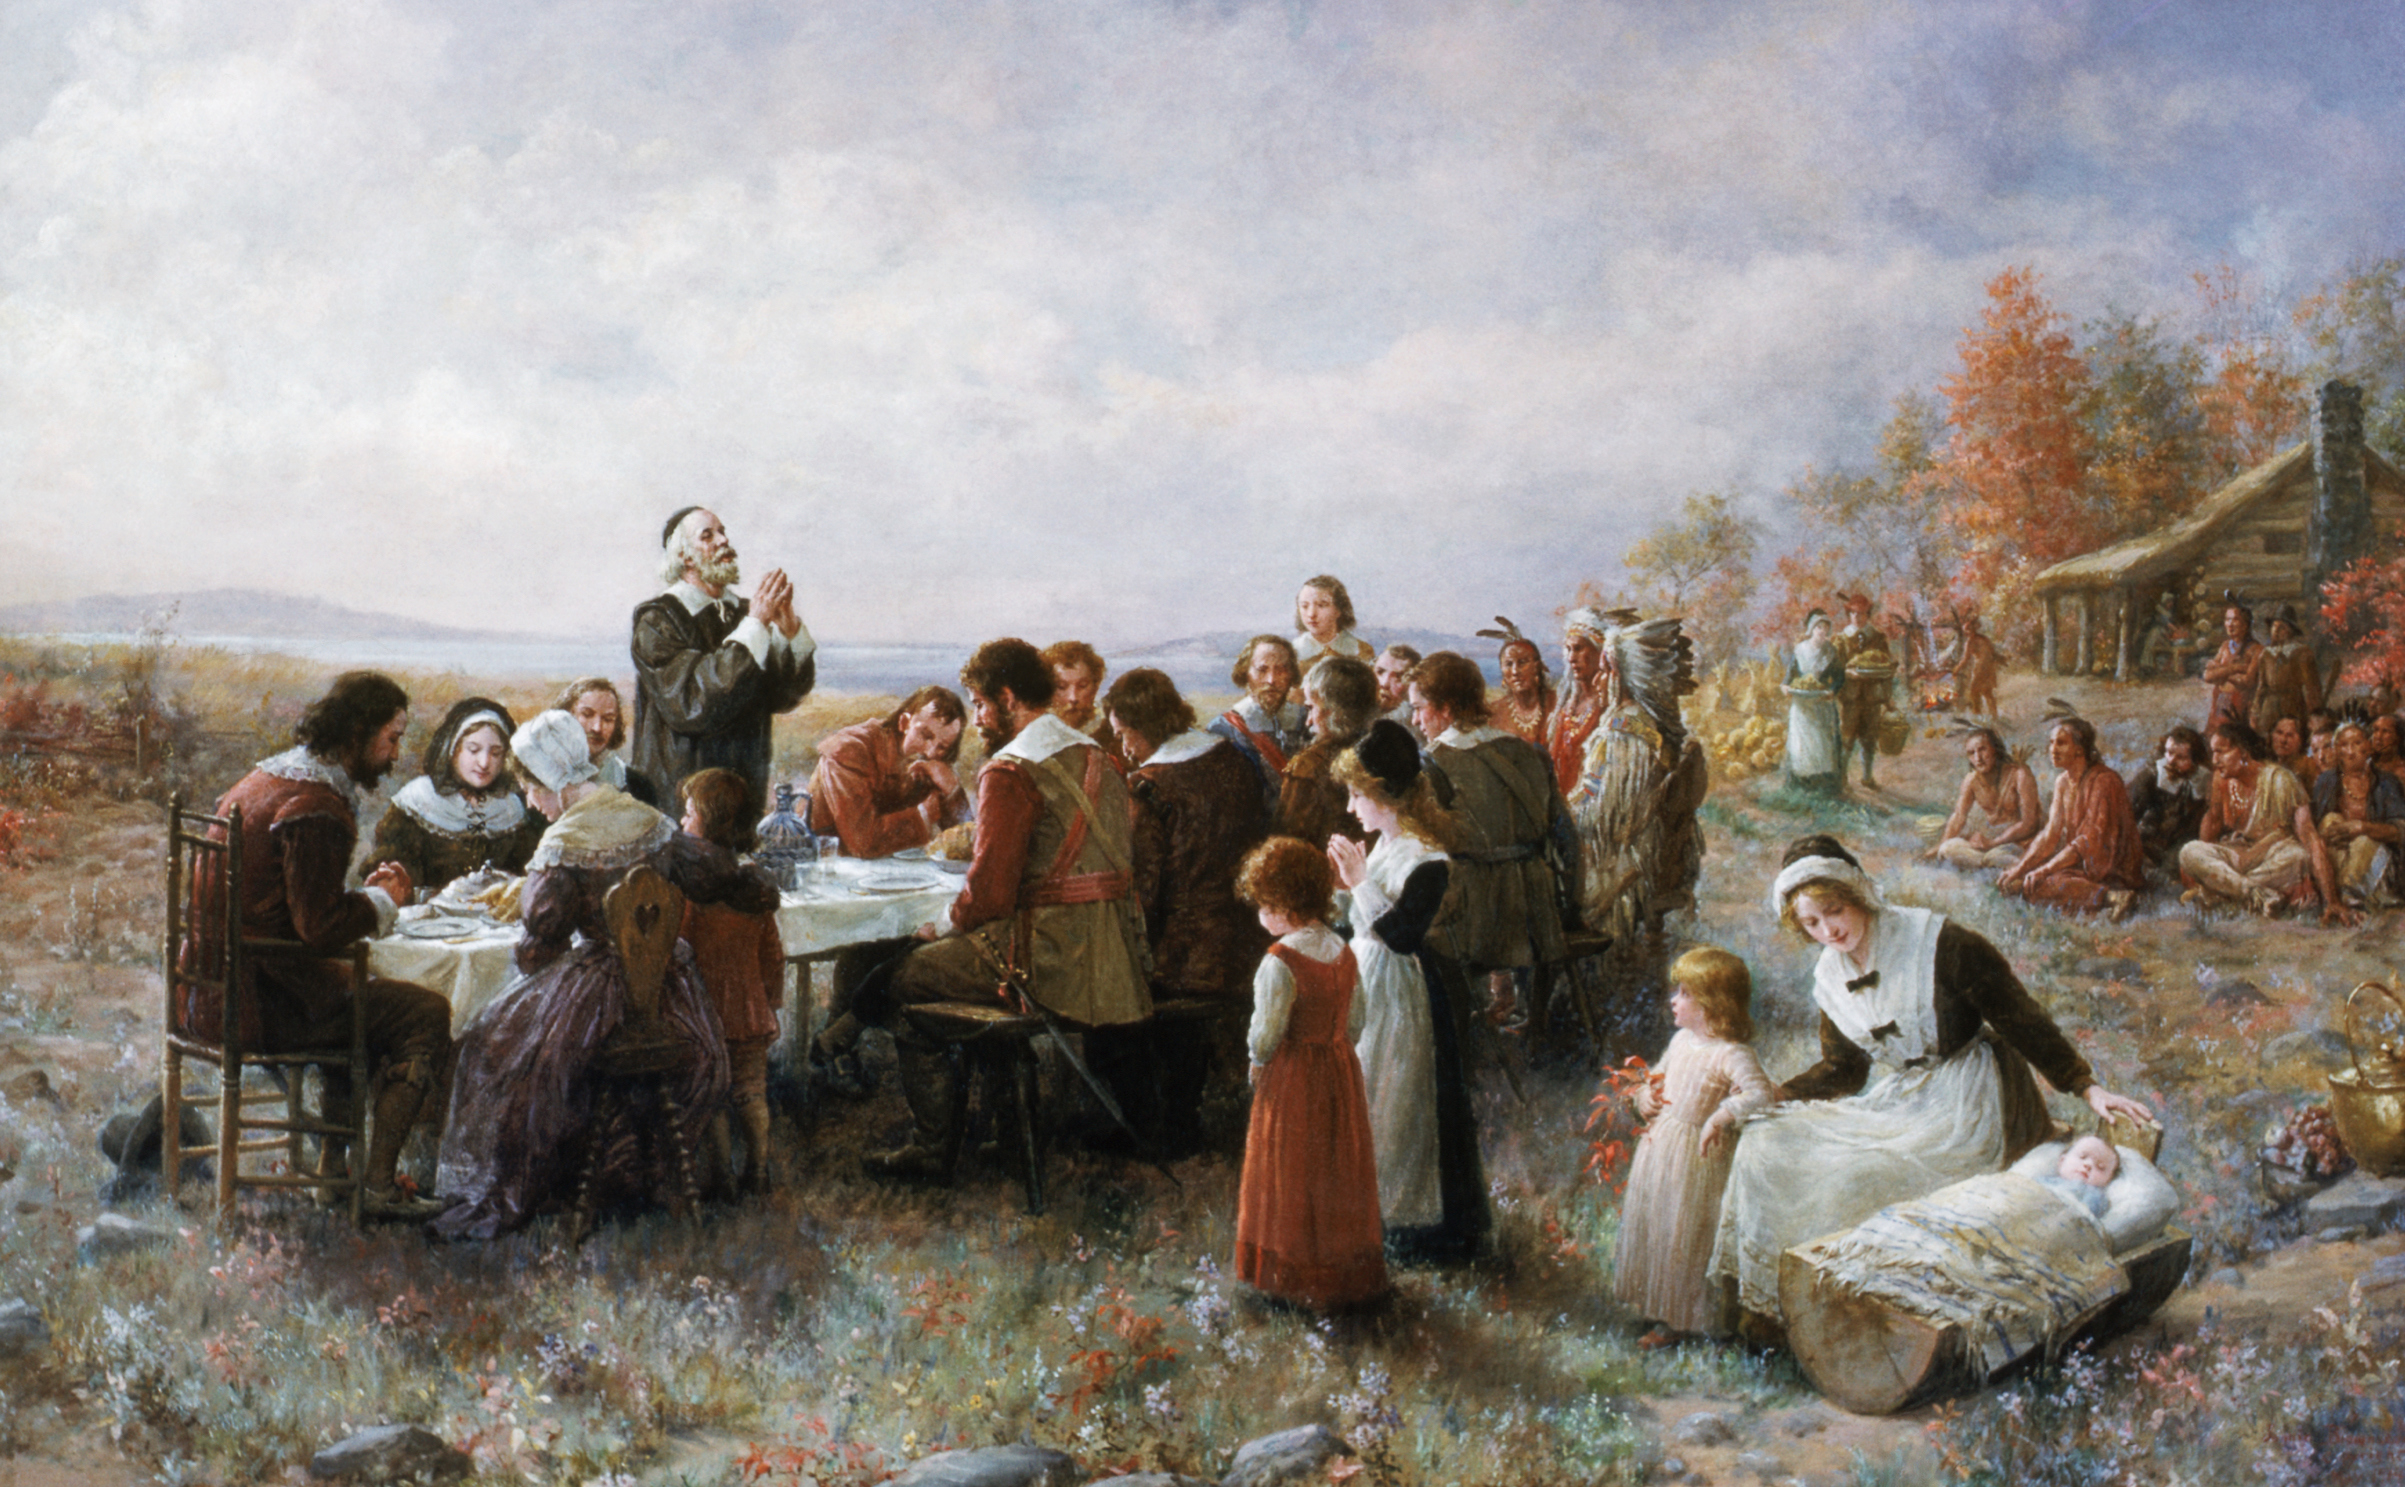 'The First Thanksgiving' by Jennie Augusta Brownscombe, an example of the kind of vision of Thanksgiving that spread in the 19th century (Barney Burstein/Corbis/VCG via Getty Images)